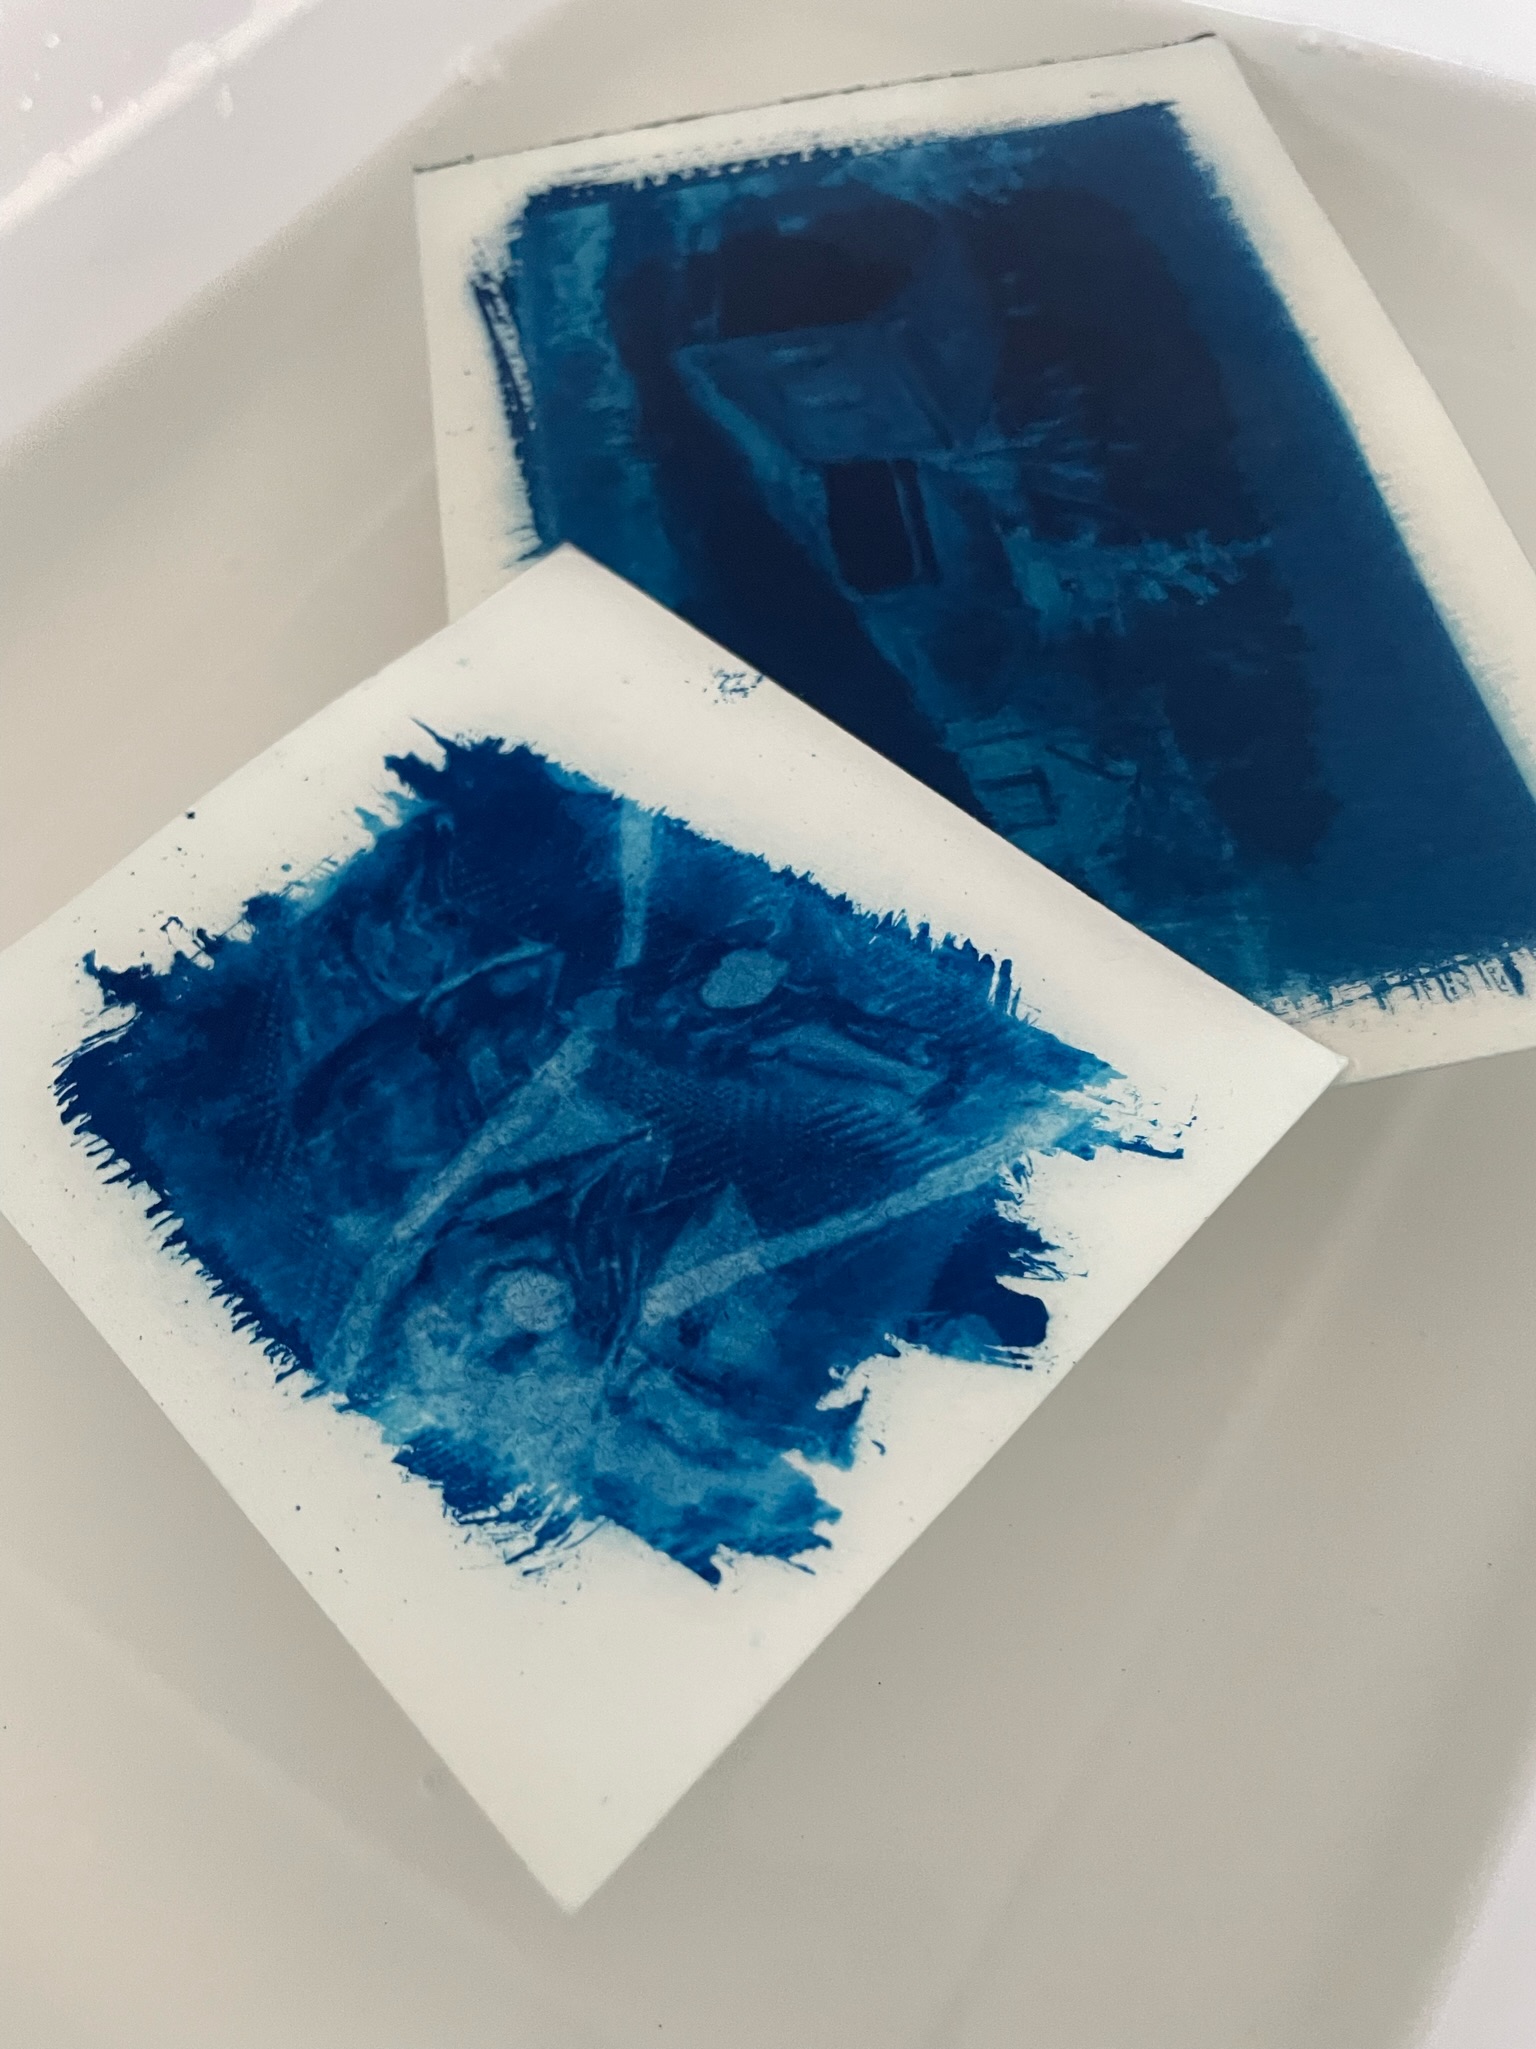 An Introduction to Cyanotype Printing